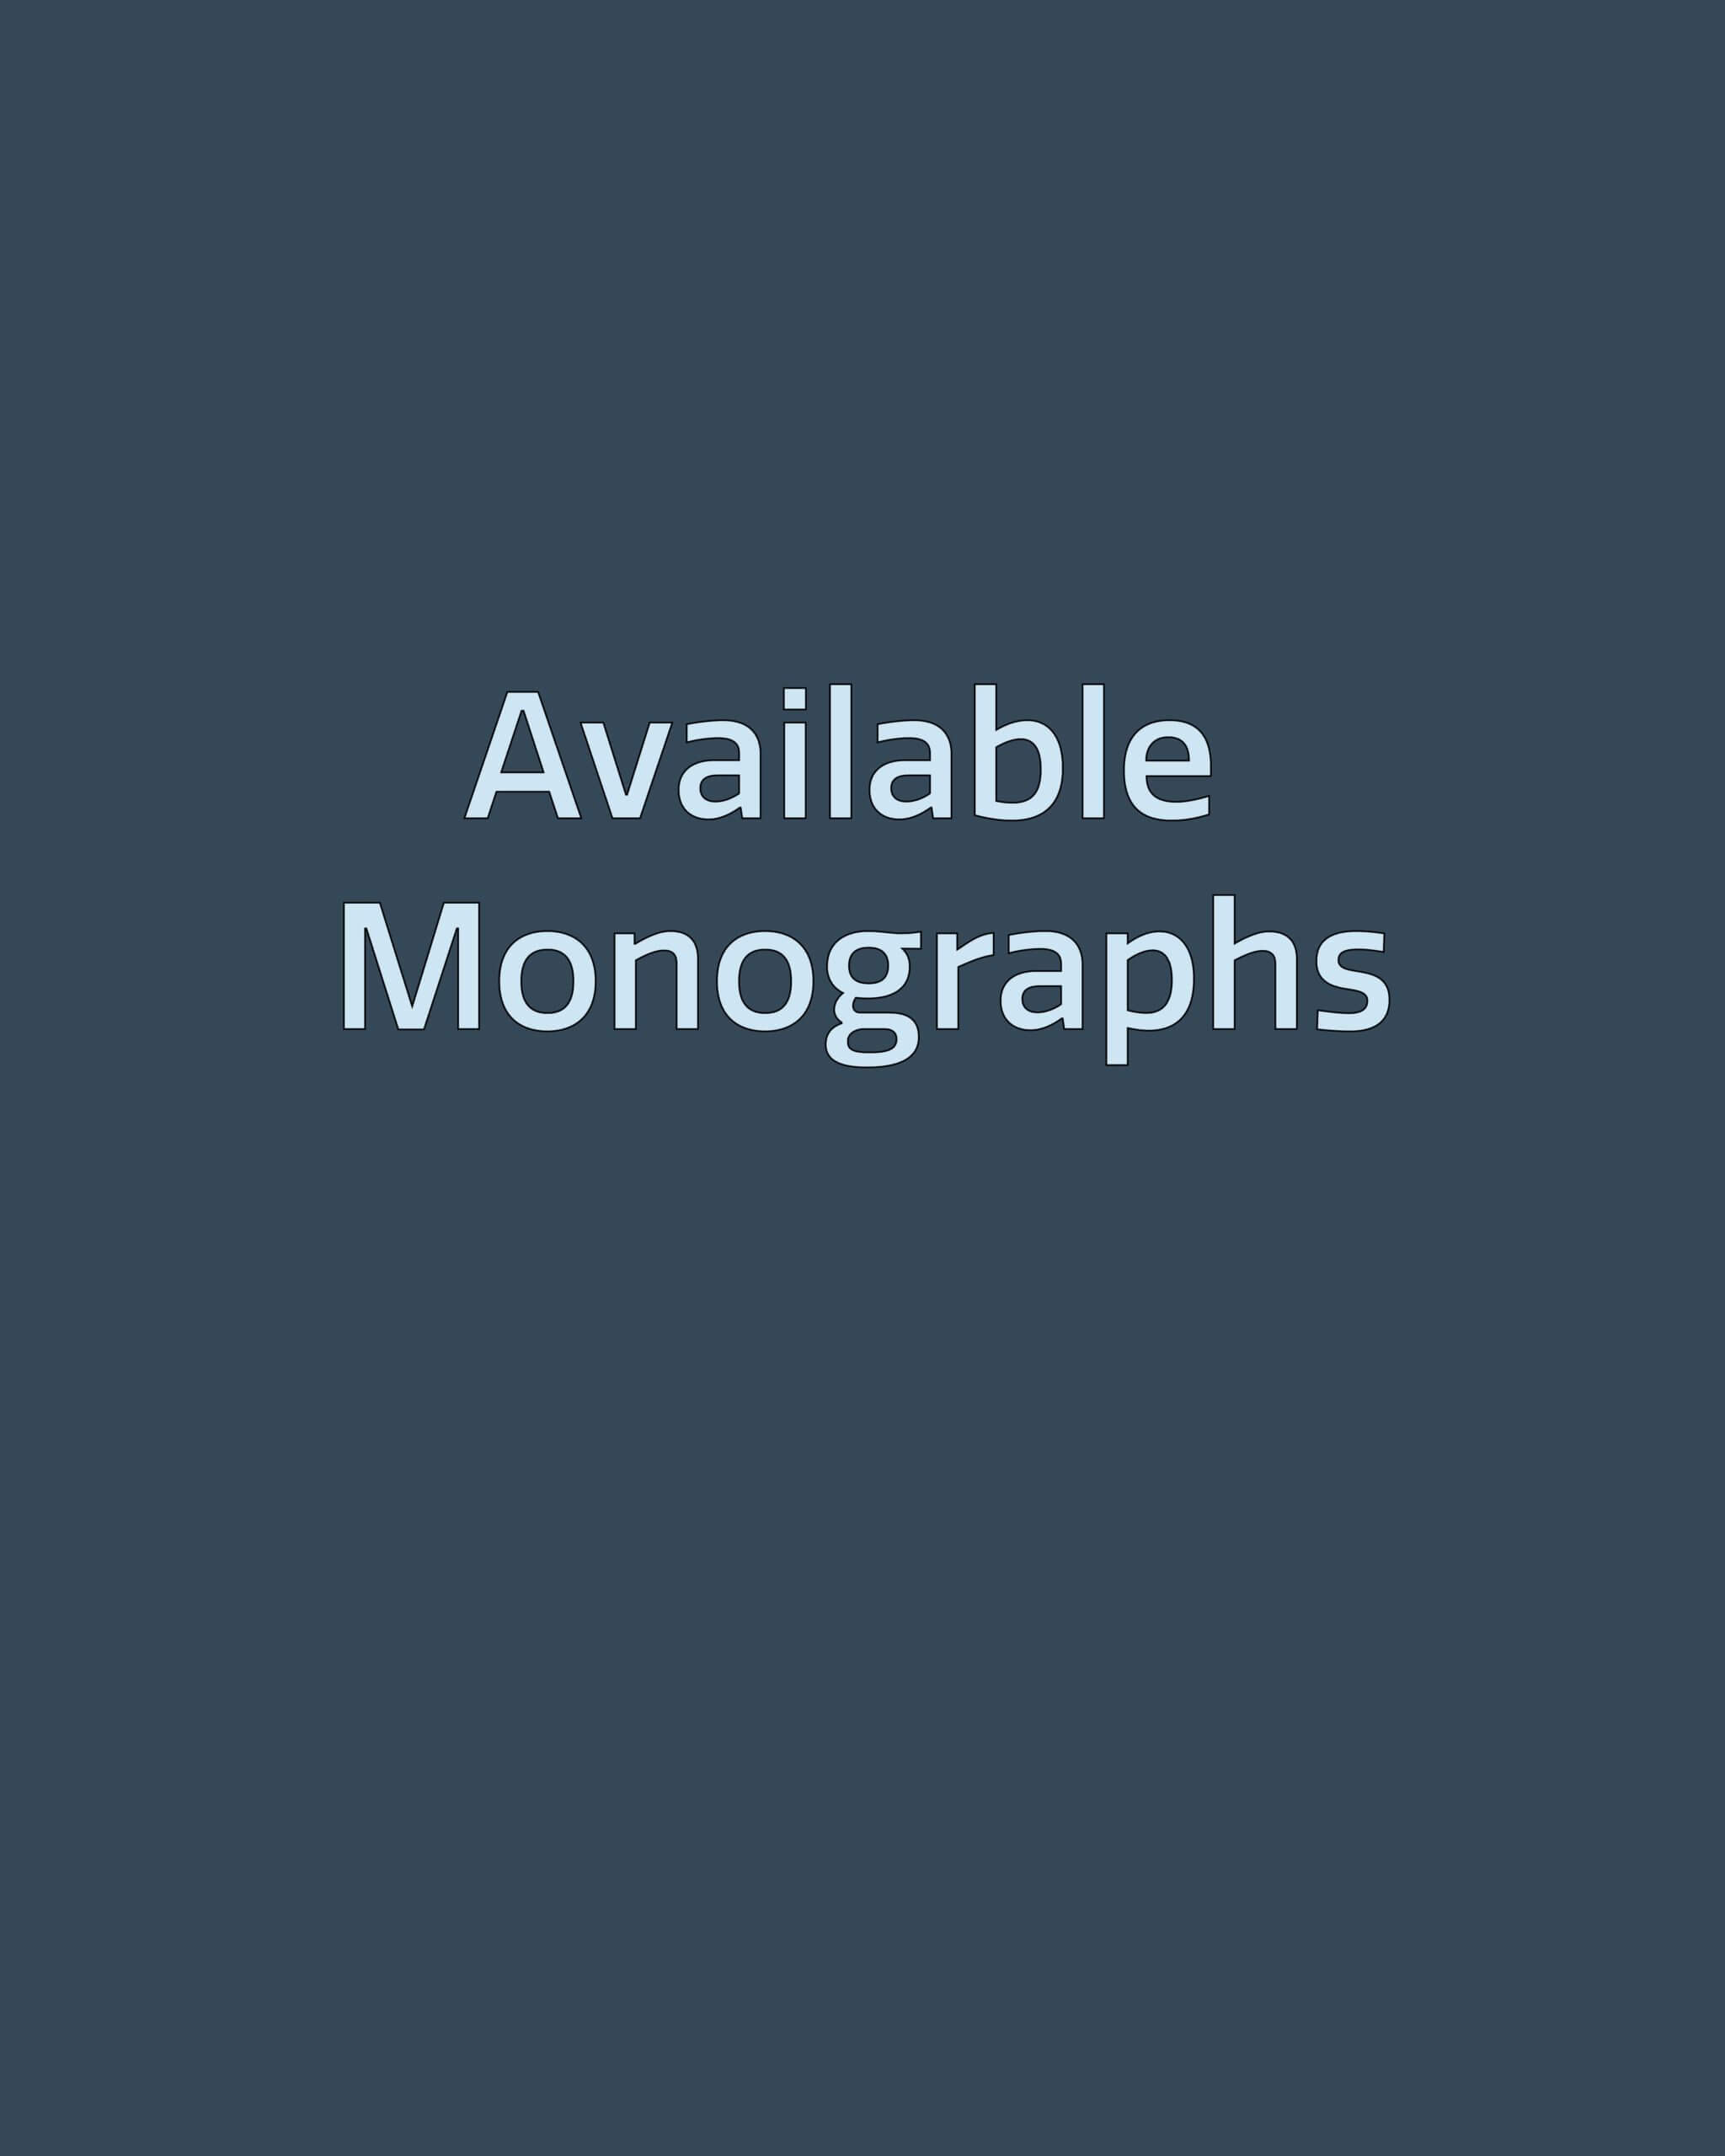 Available Monographs